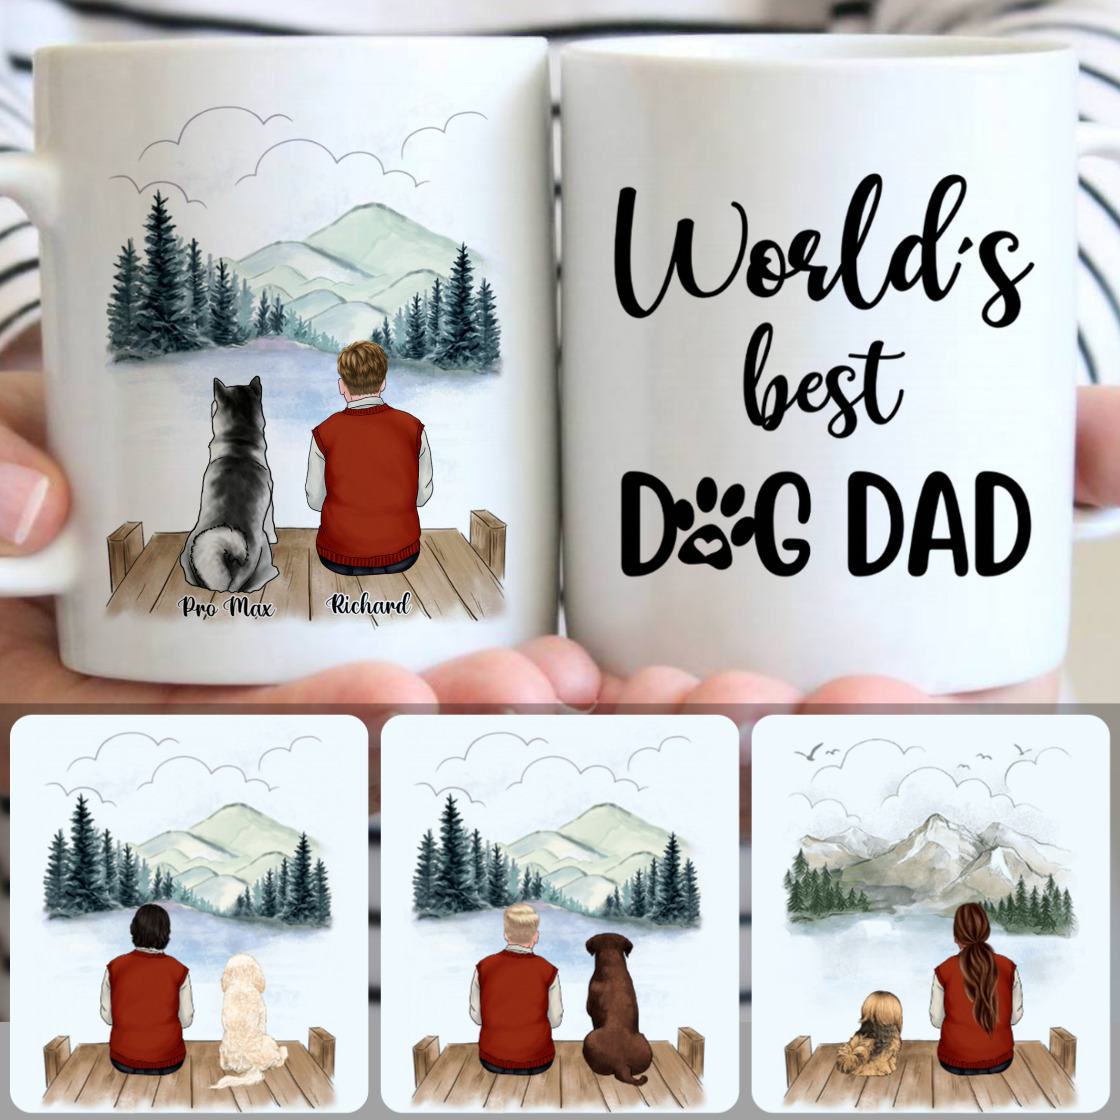 Personalized Mug, Special Gifts For Husband, Old Man & Dog Customized Coffee Mug With Names